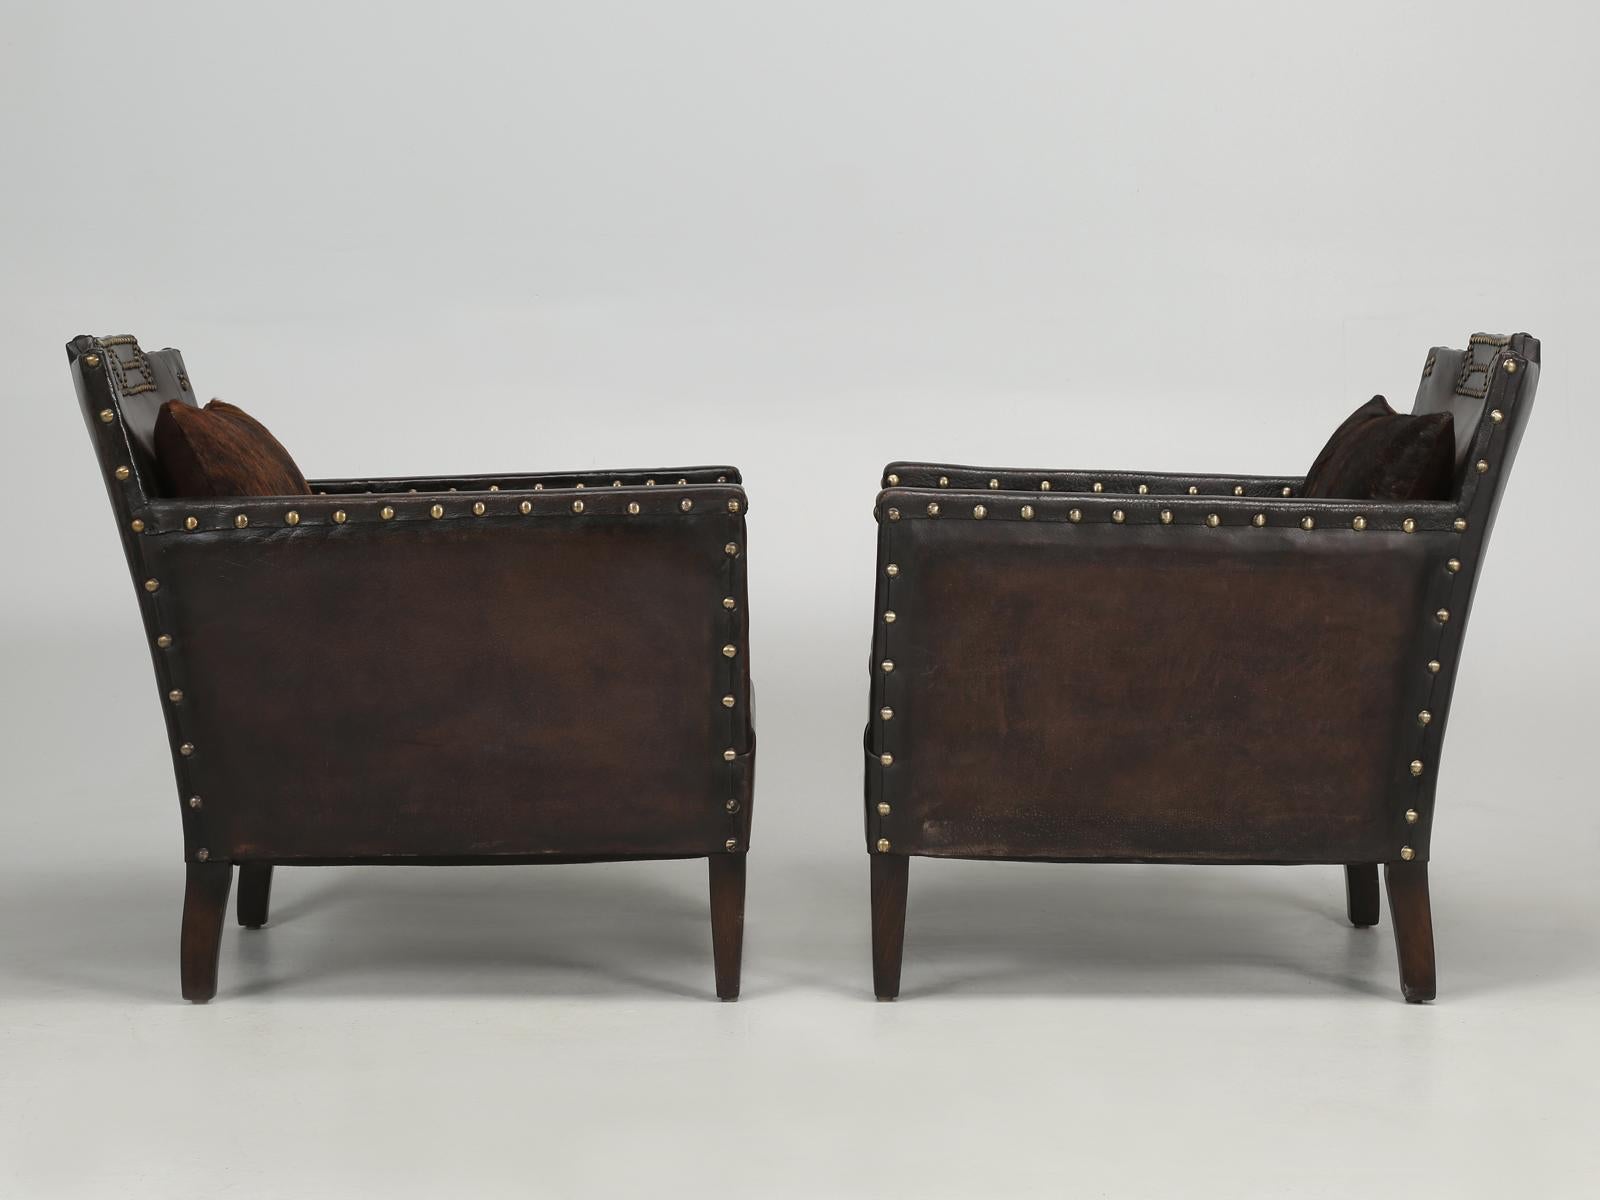 French leather club chairs in a fairly unique style and perfect for tight spaces, while still very extremely comfortable for us larger individuals. Both of these French leather club chairs have gone through our extensive club chair restoration